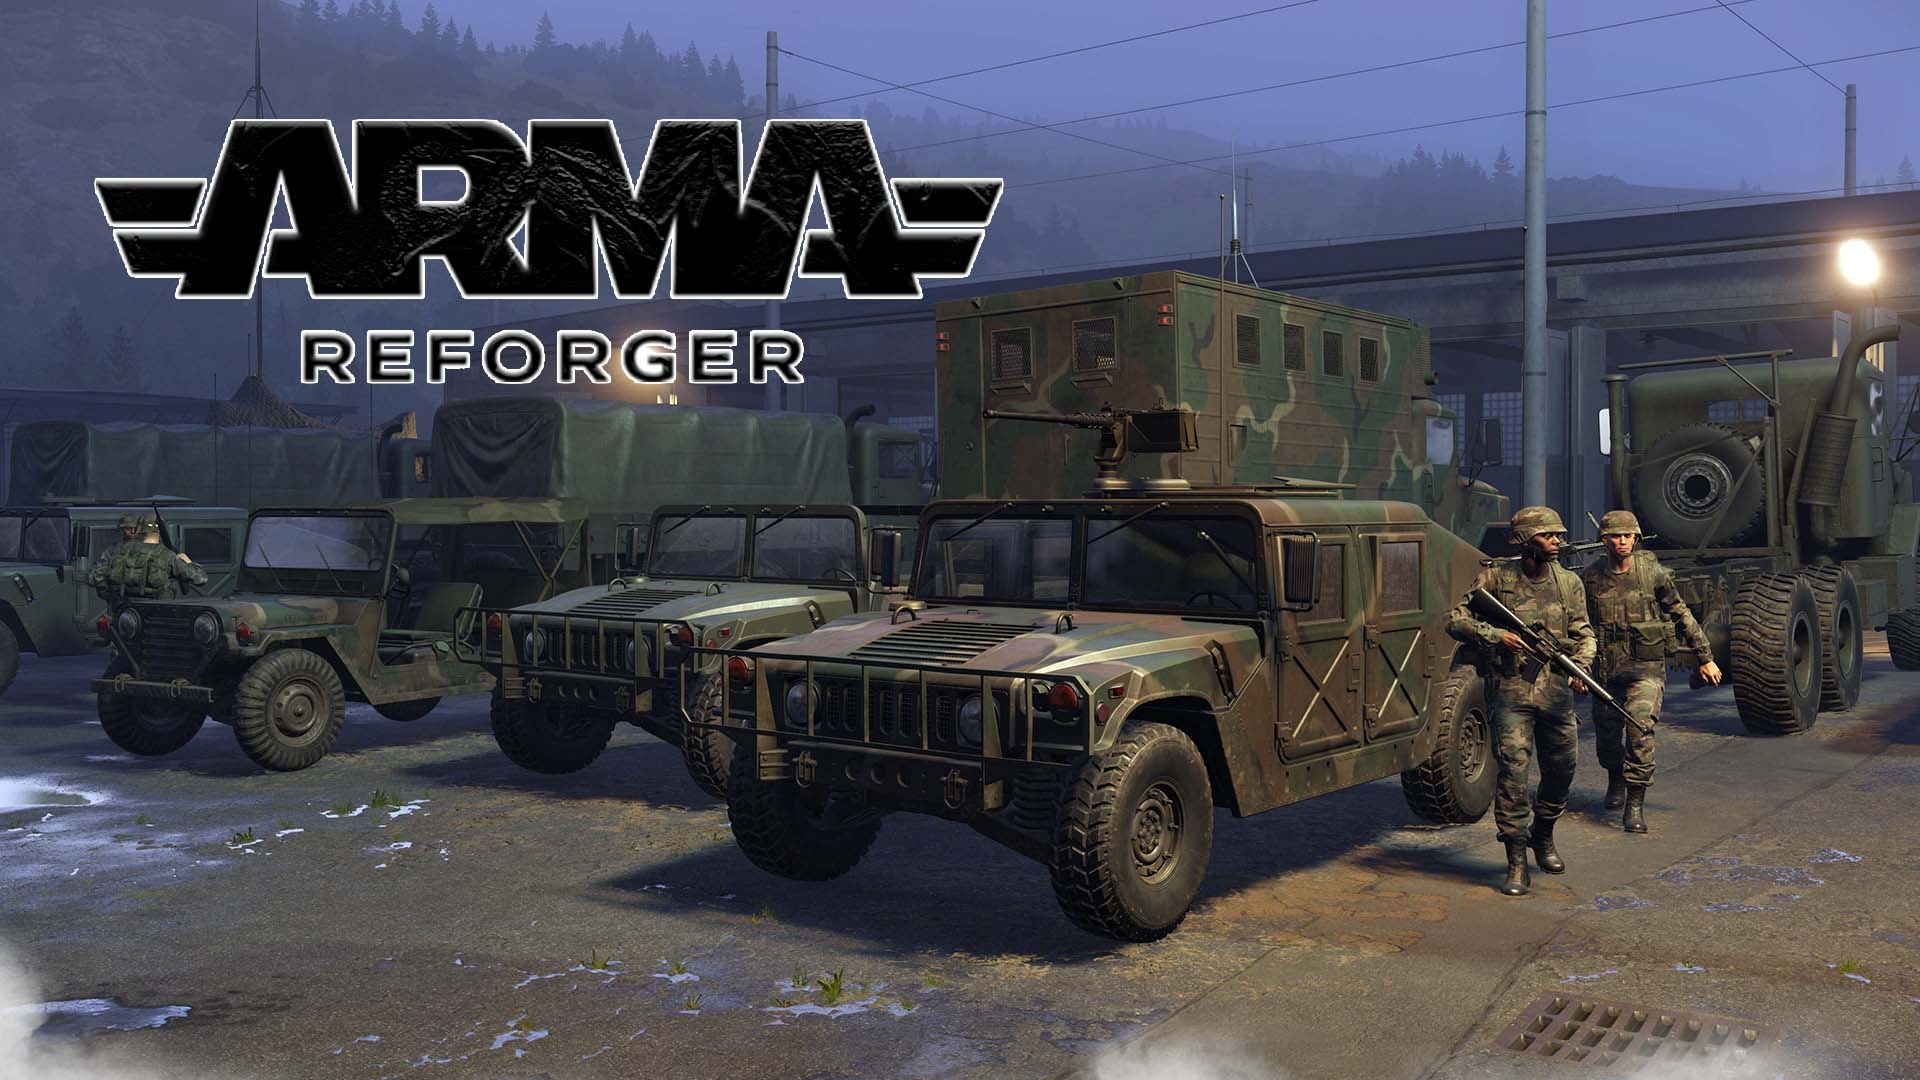 Arma Reforger: A 2022 first-person tactical military shooter, developed by Czech studio Bohemia Interactive. 1920x1080 Full HD Wallpaper.